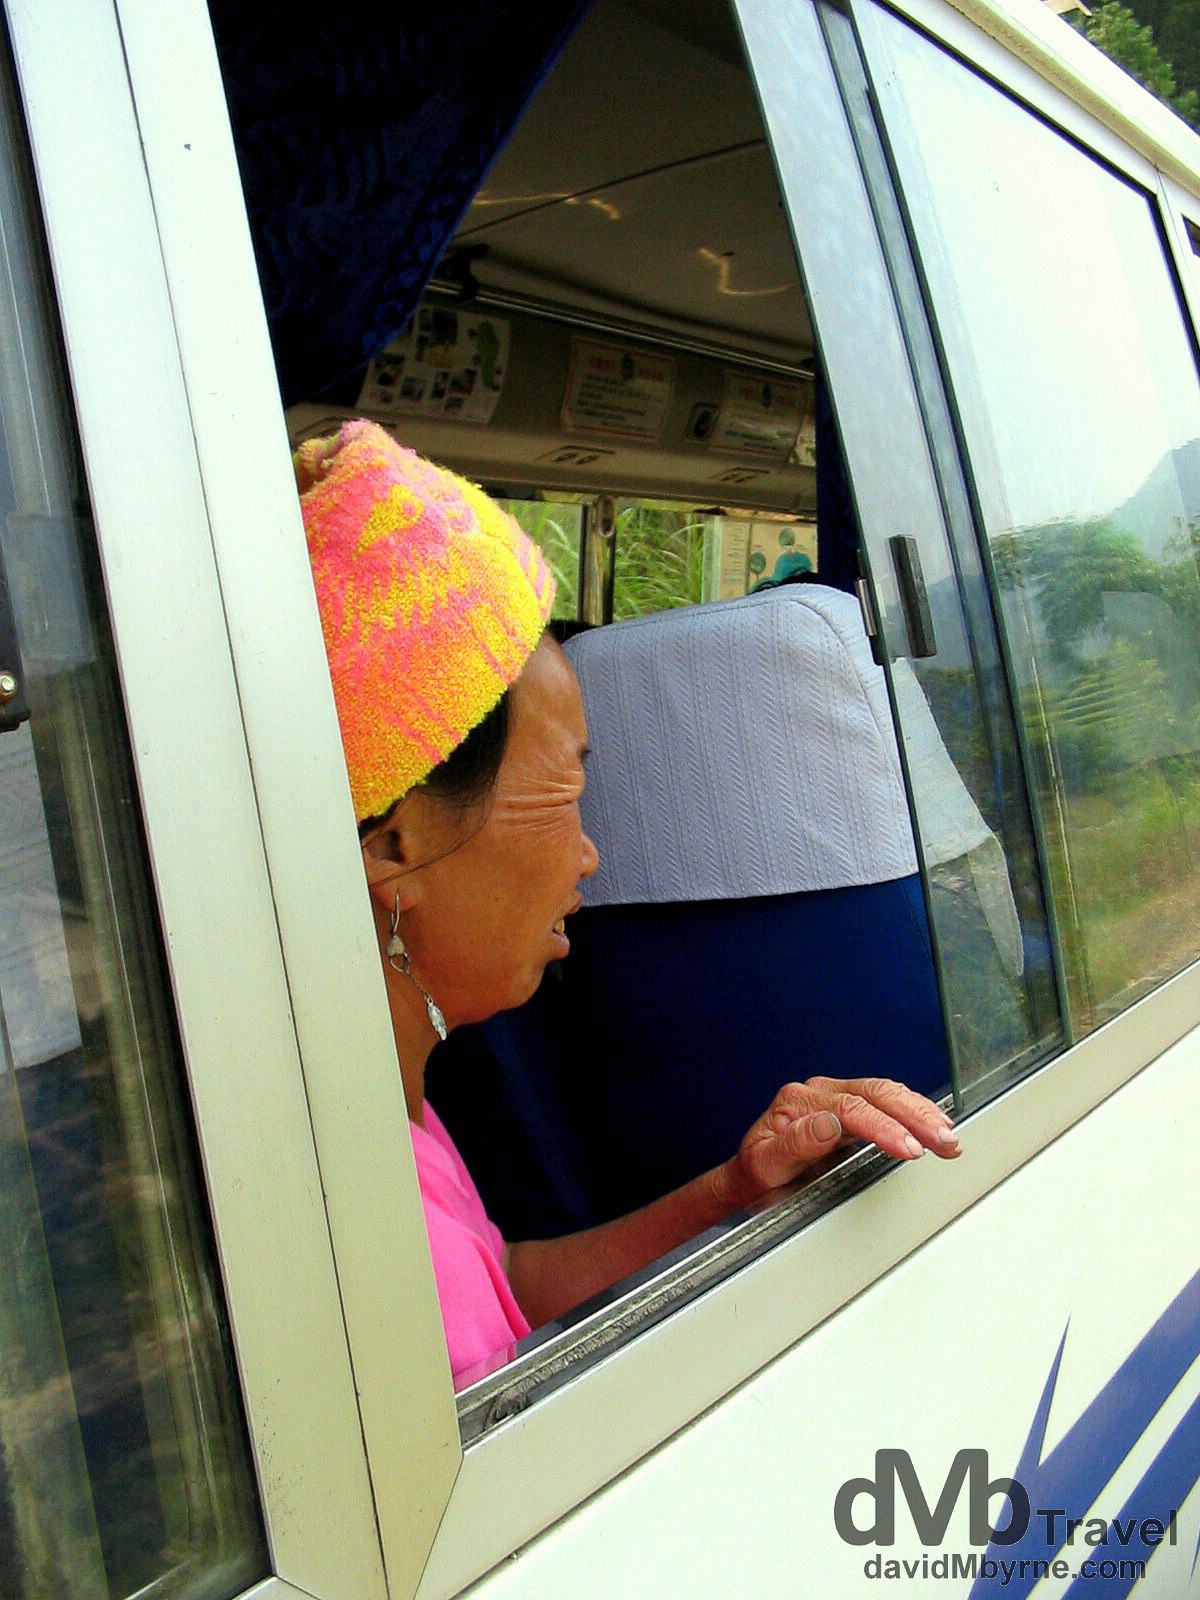 Riding the bus from Ping An Zhuang minority village to Longshang, Guangxi Province, Southern China. September 17th, 2004.